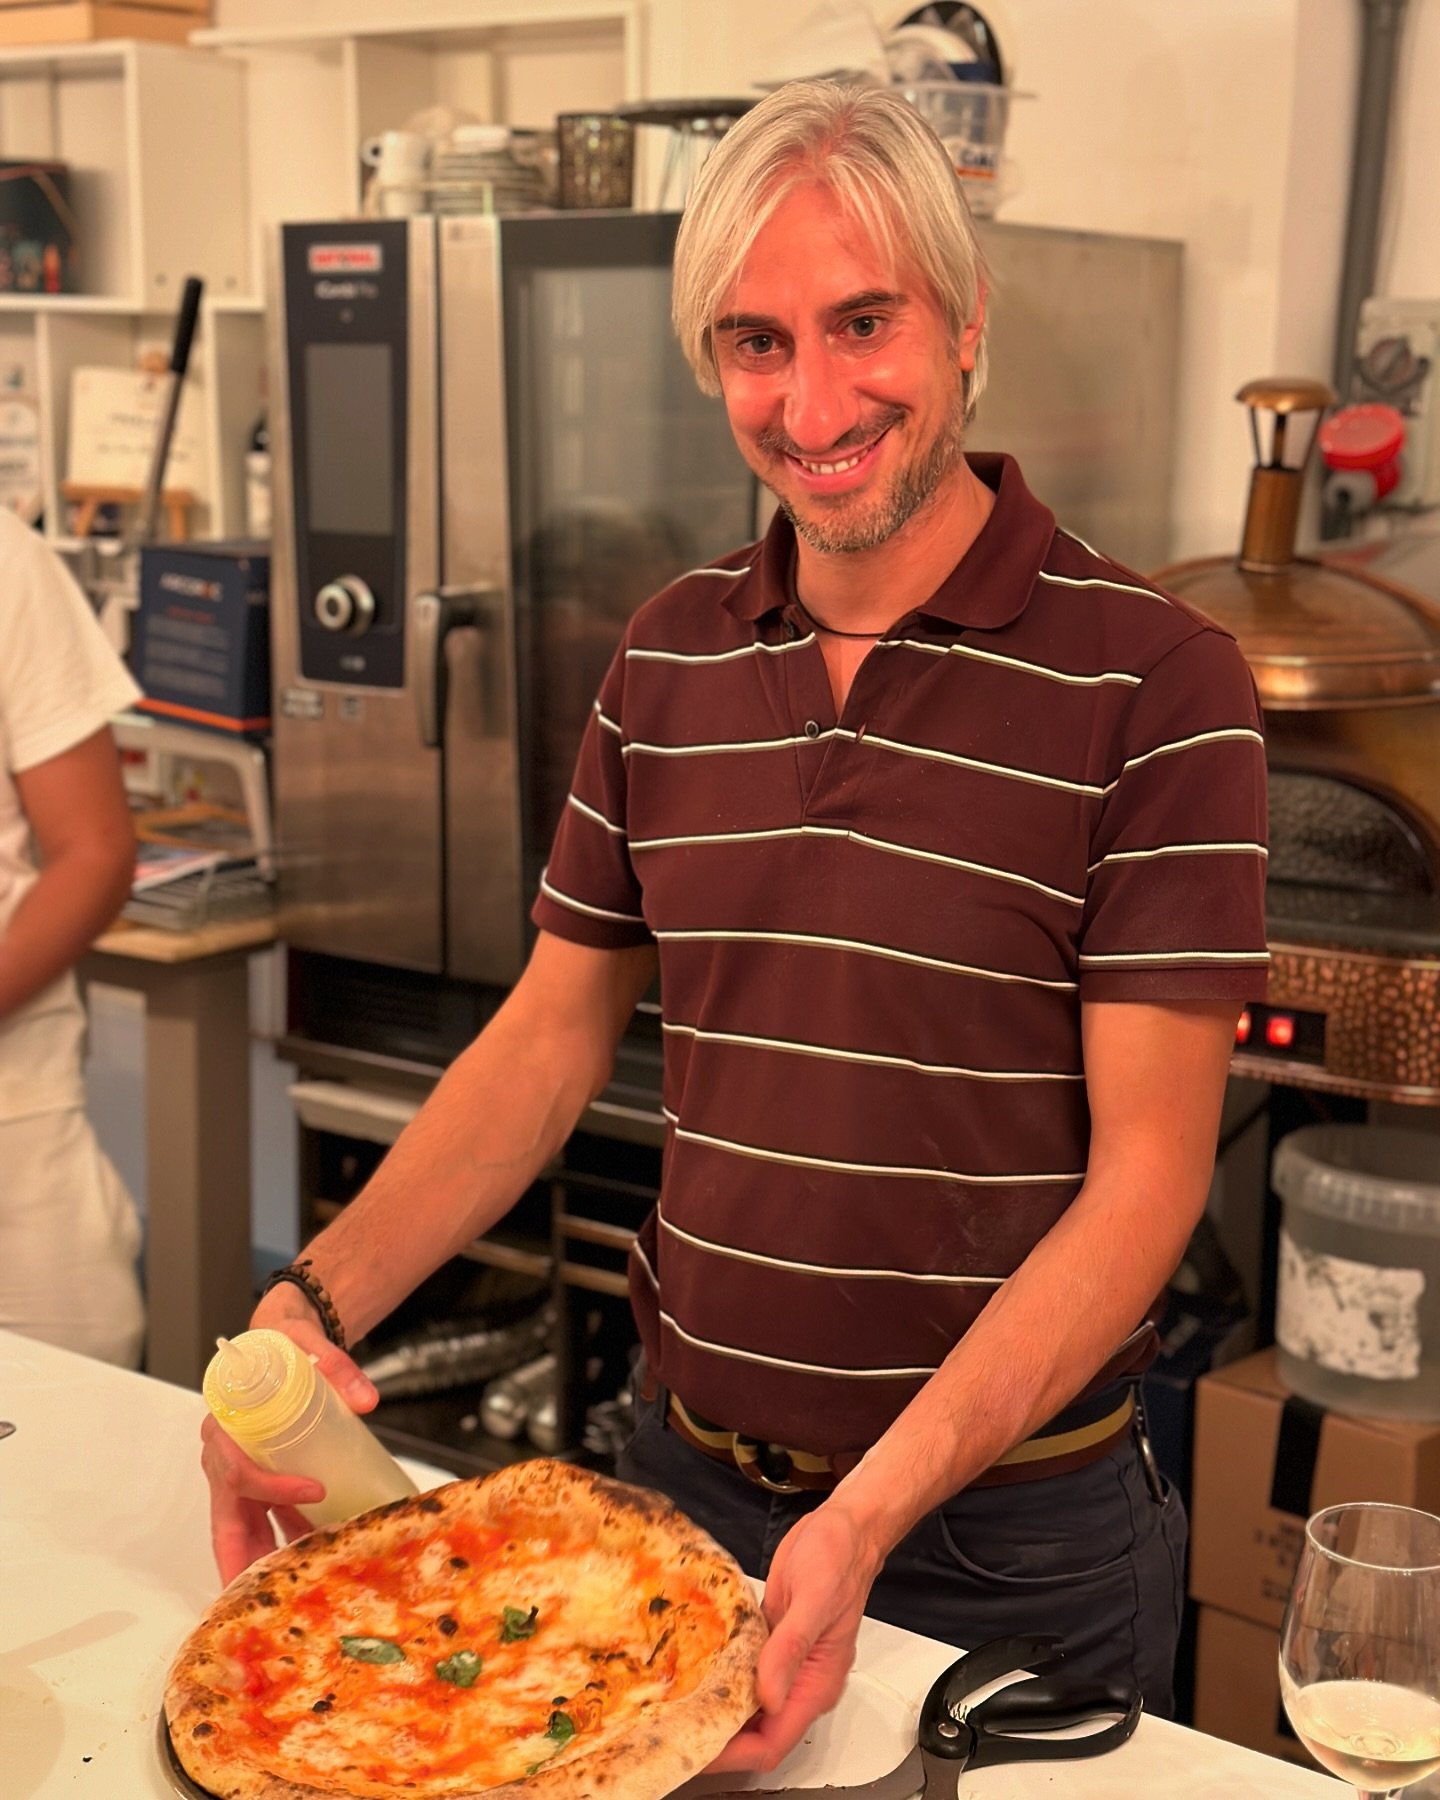 Let&rsquo;s light the oven!
Who doesn&rsquo;t want to have pizza &amp; Champagne with this guy?! 
Join us for a talk and tasting with Bernardo Conticelli and Kristie Brablec, the managing partner of Zingerman&rsquo;s Food Tours. We will taste Champag